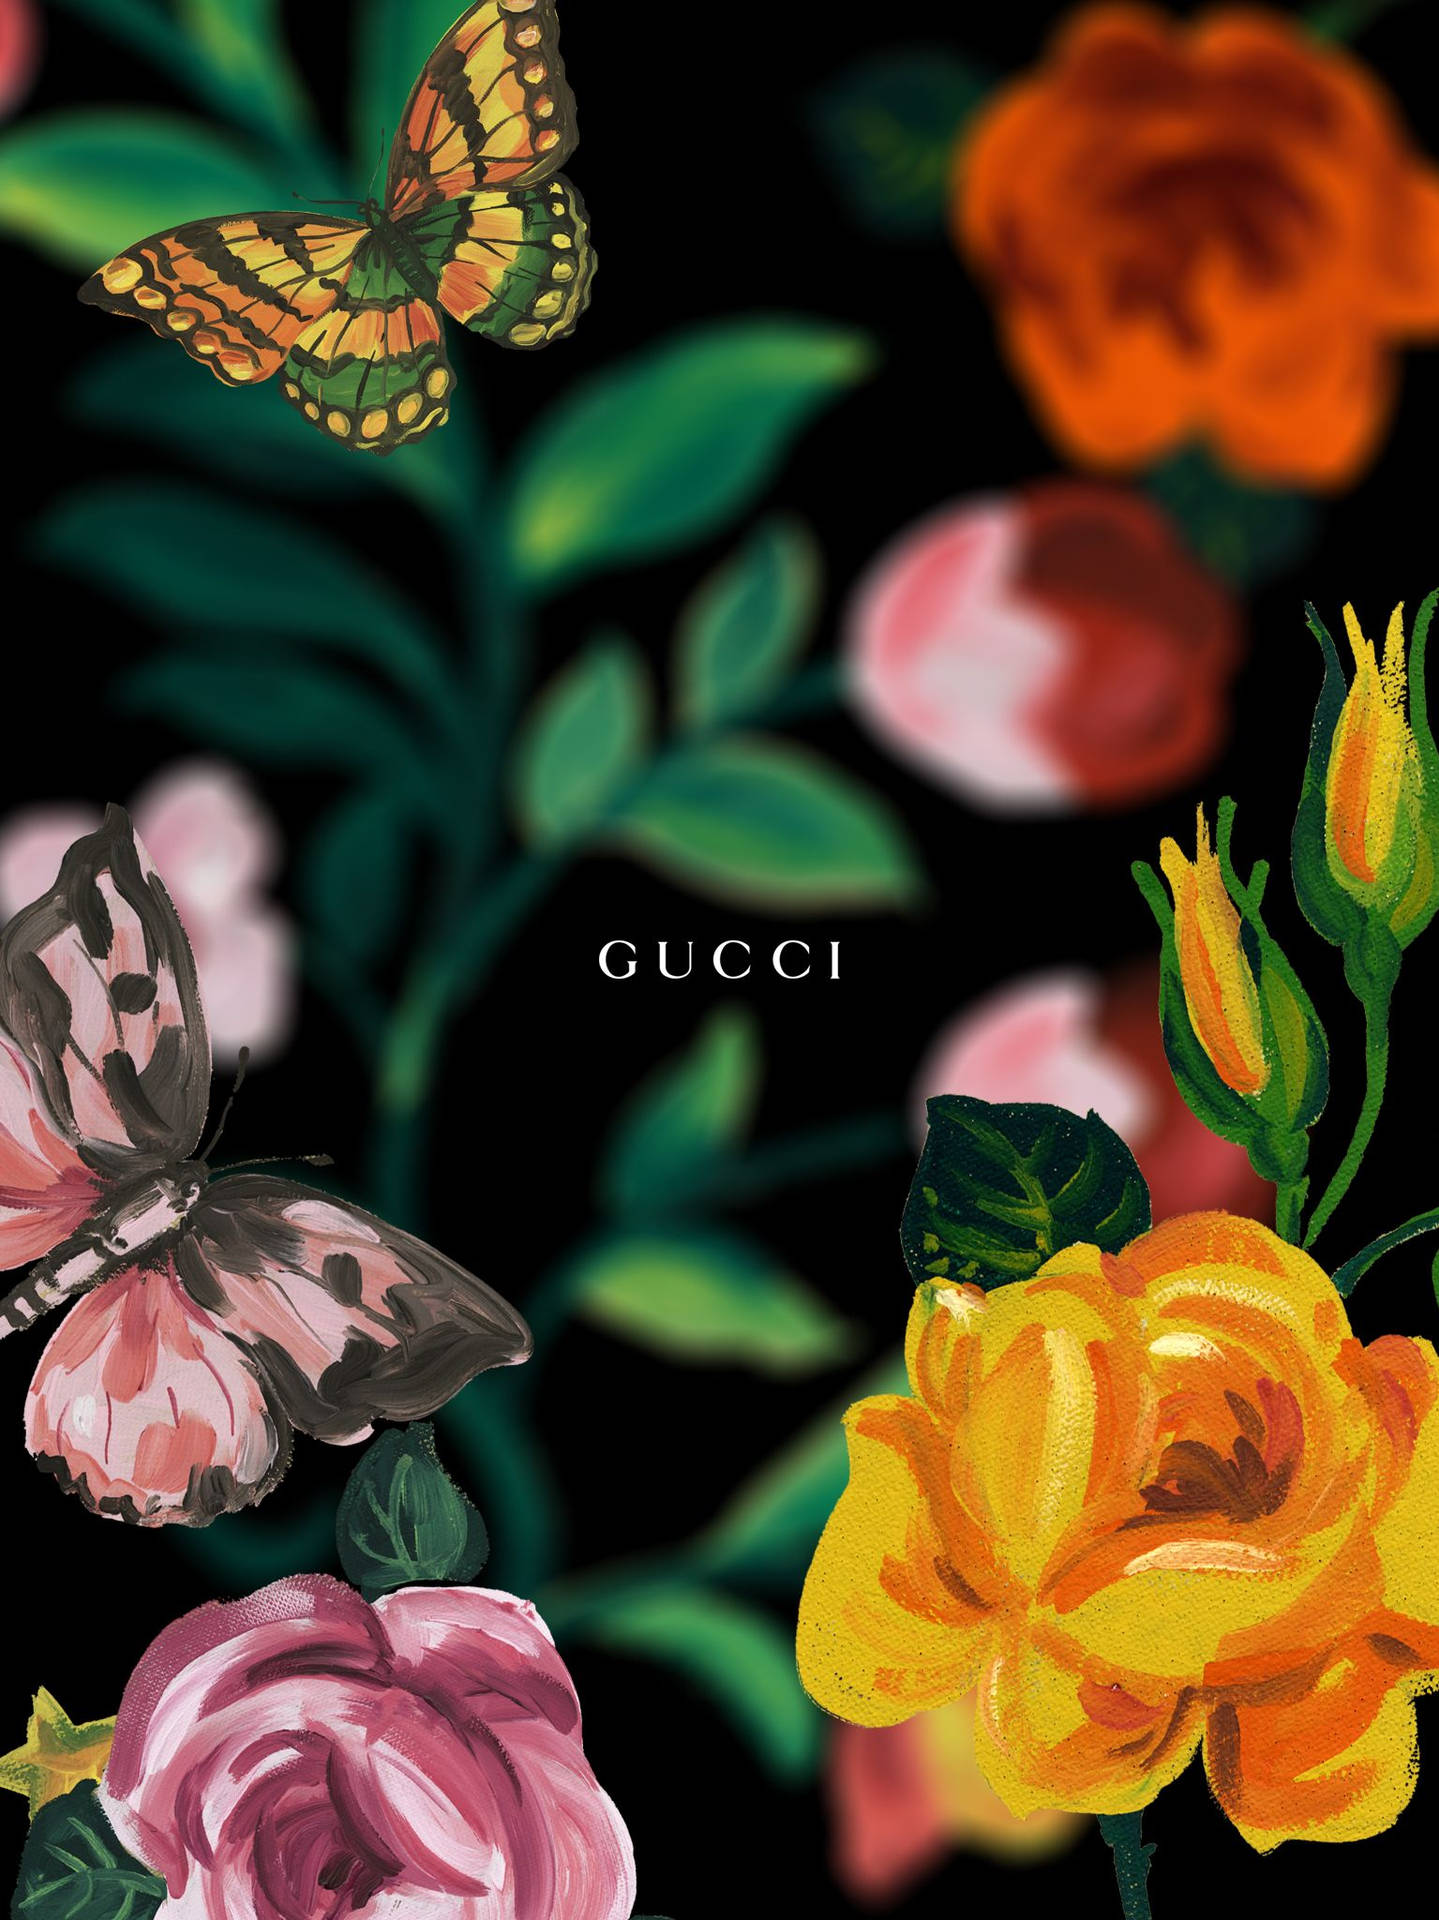 Gucci 1535X2048 Wallpaper and Background Image